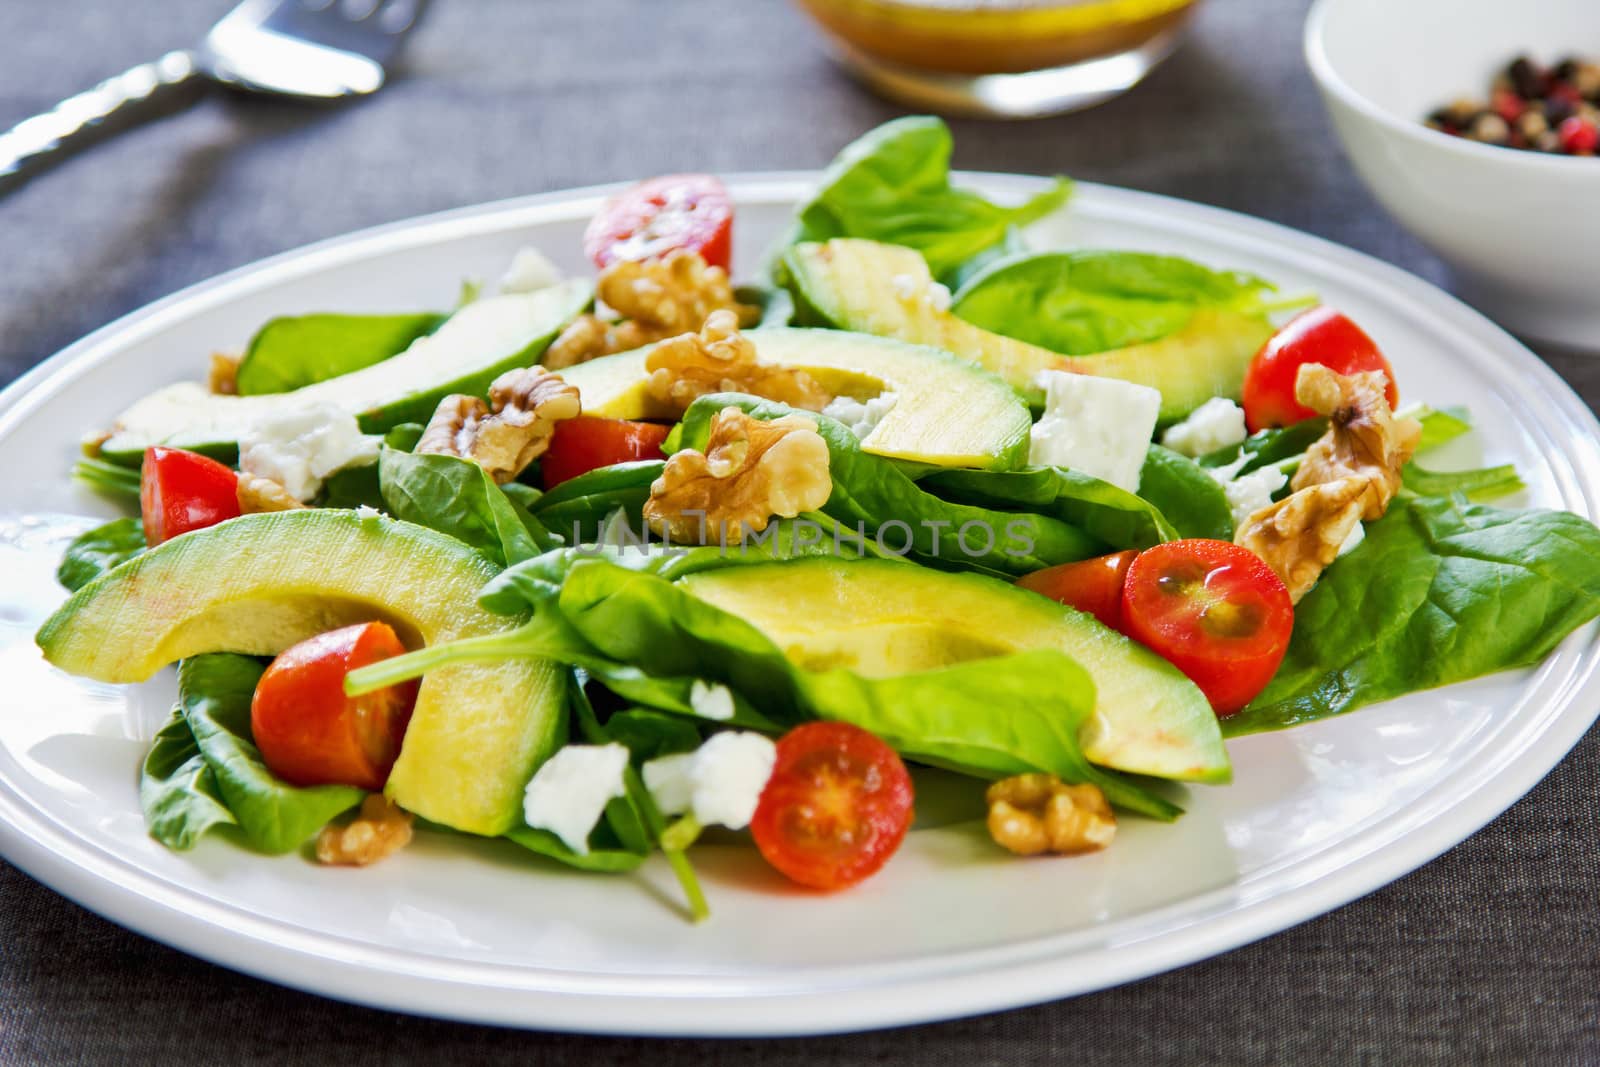 Avocado with Spinach and Feta salad by vanillaechoes